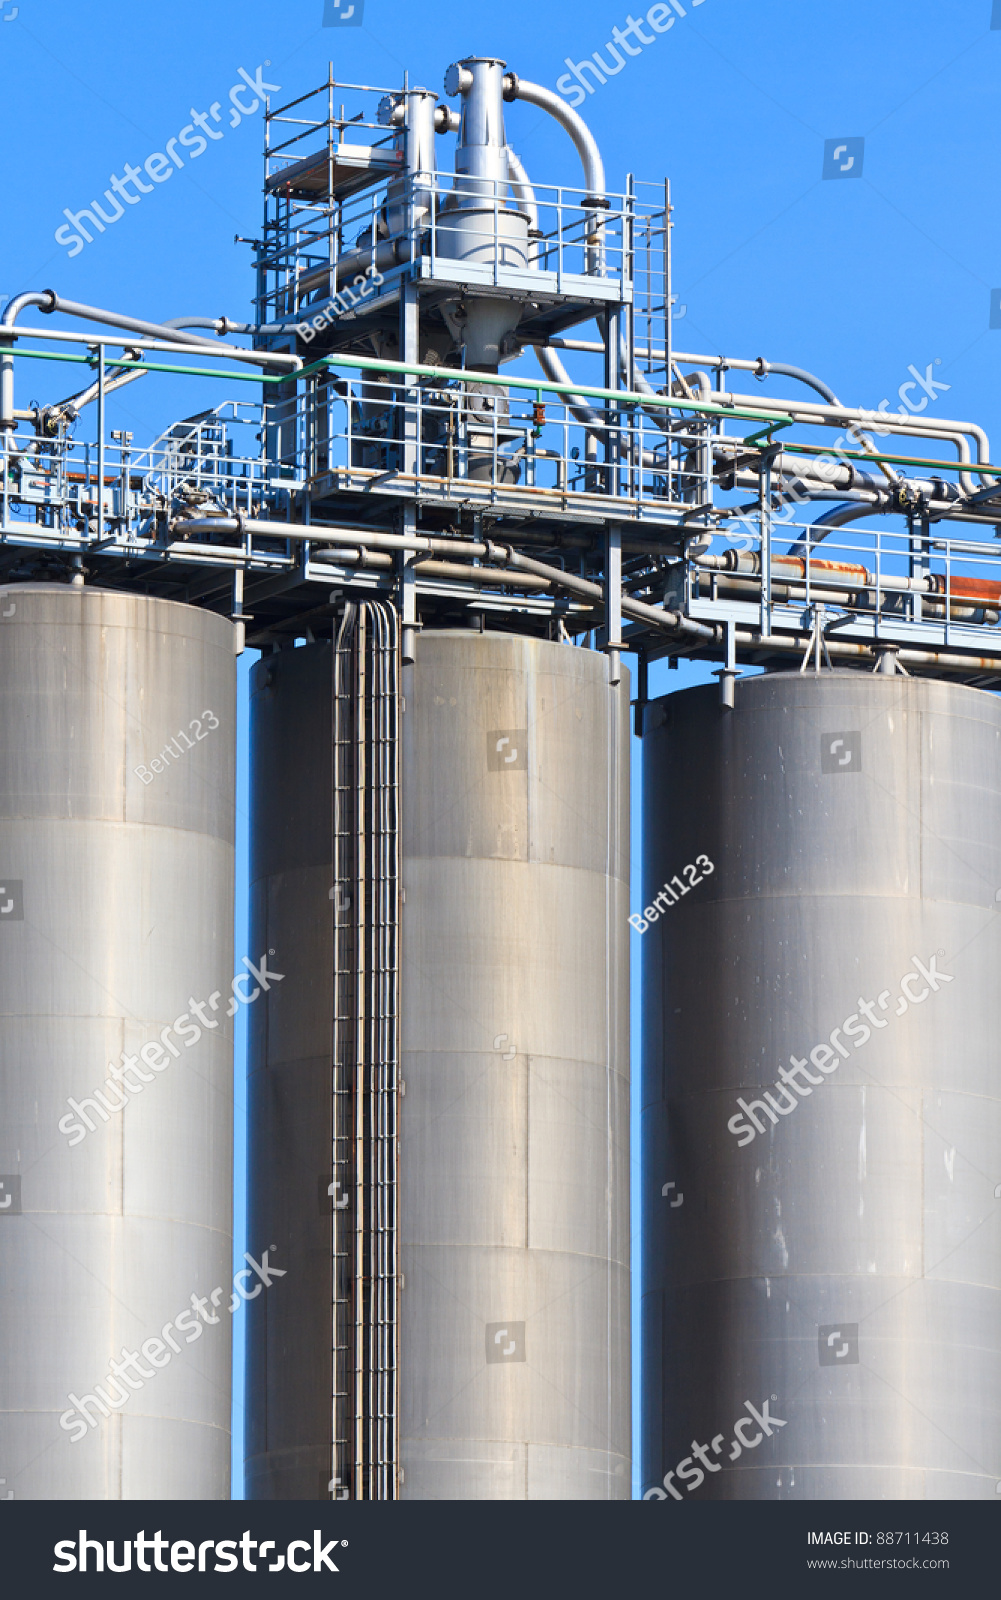 Industry Bulk Tank / Silo For Petrochemical Industry Stock Photo ...